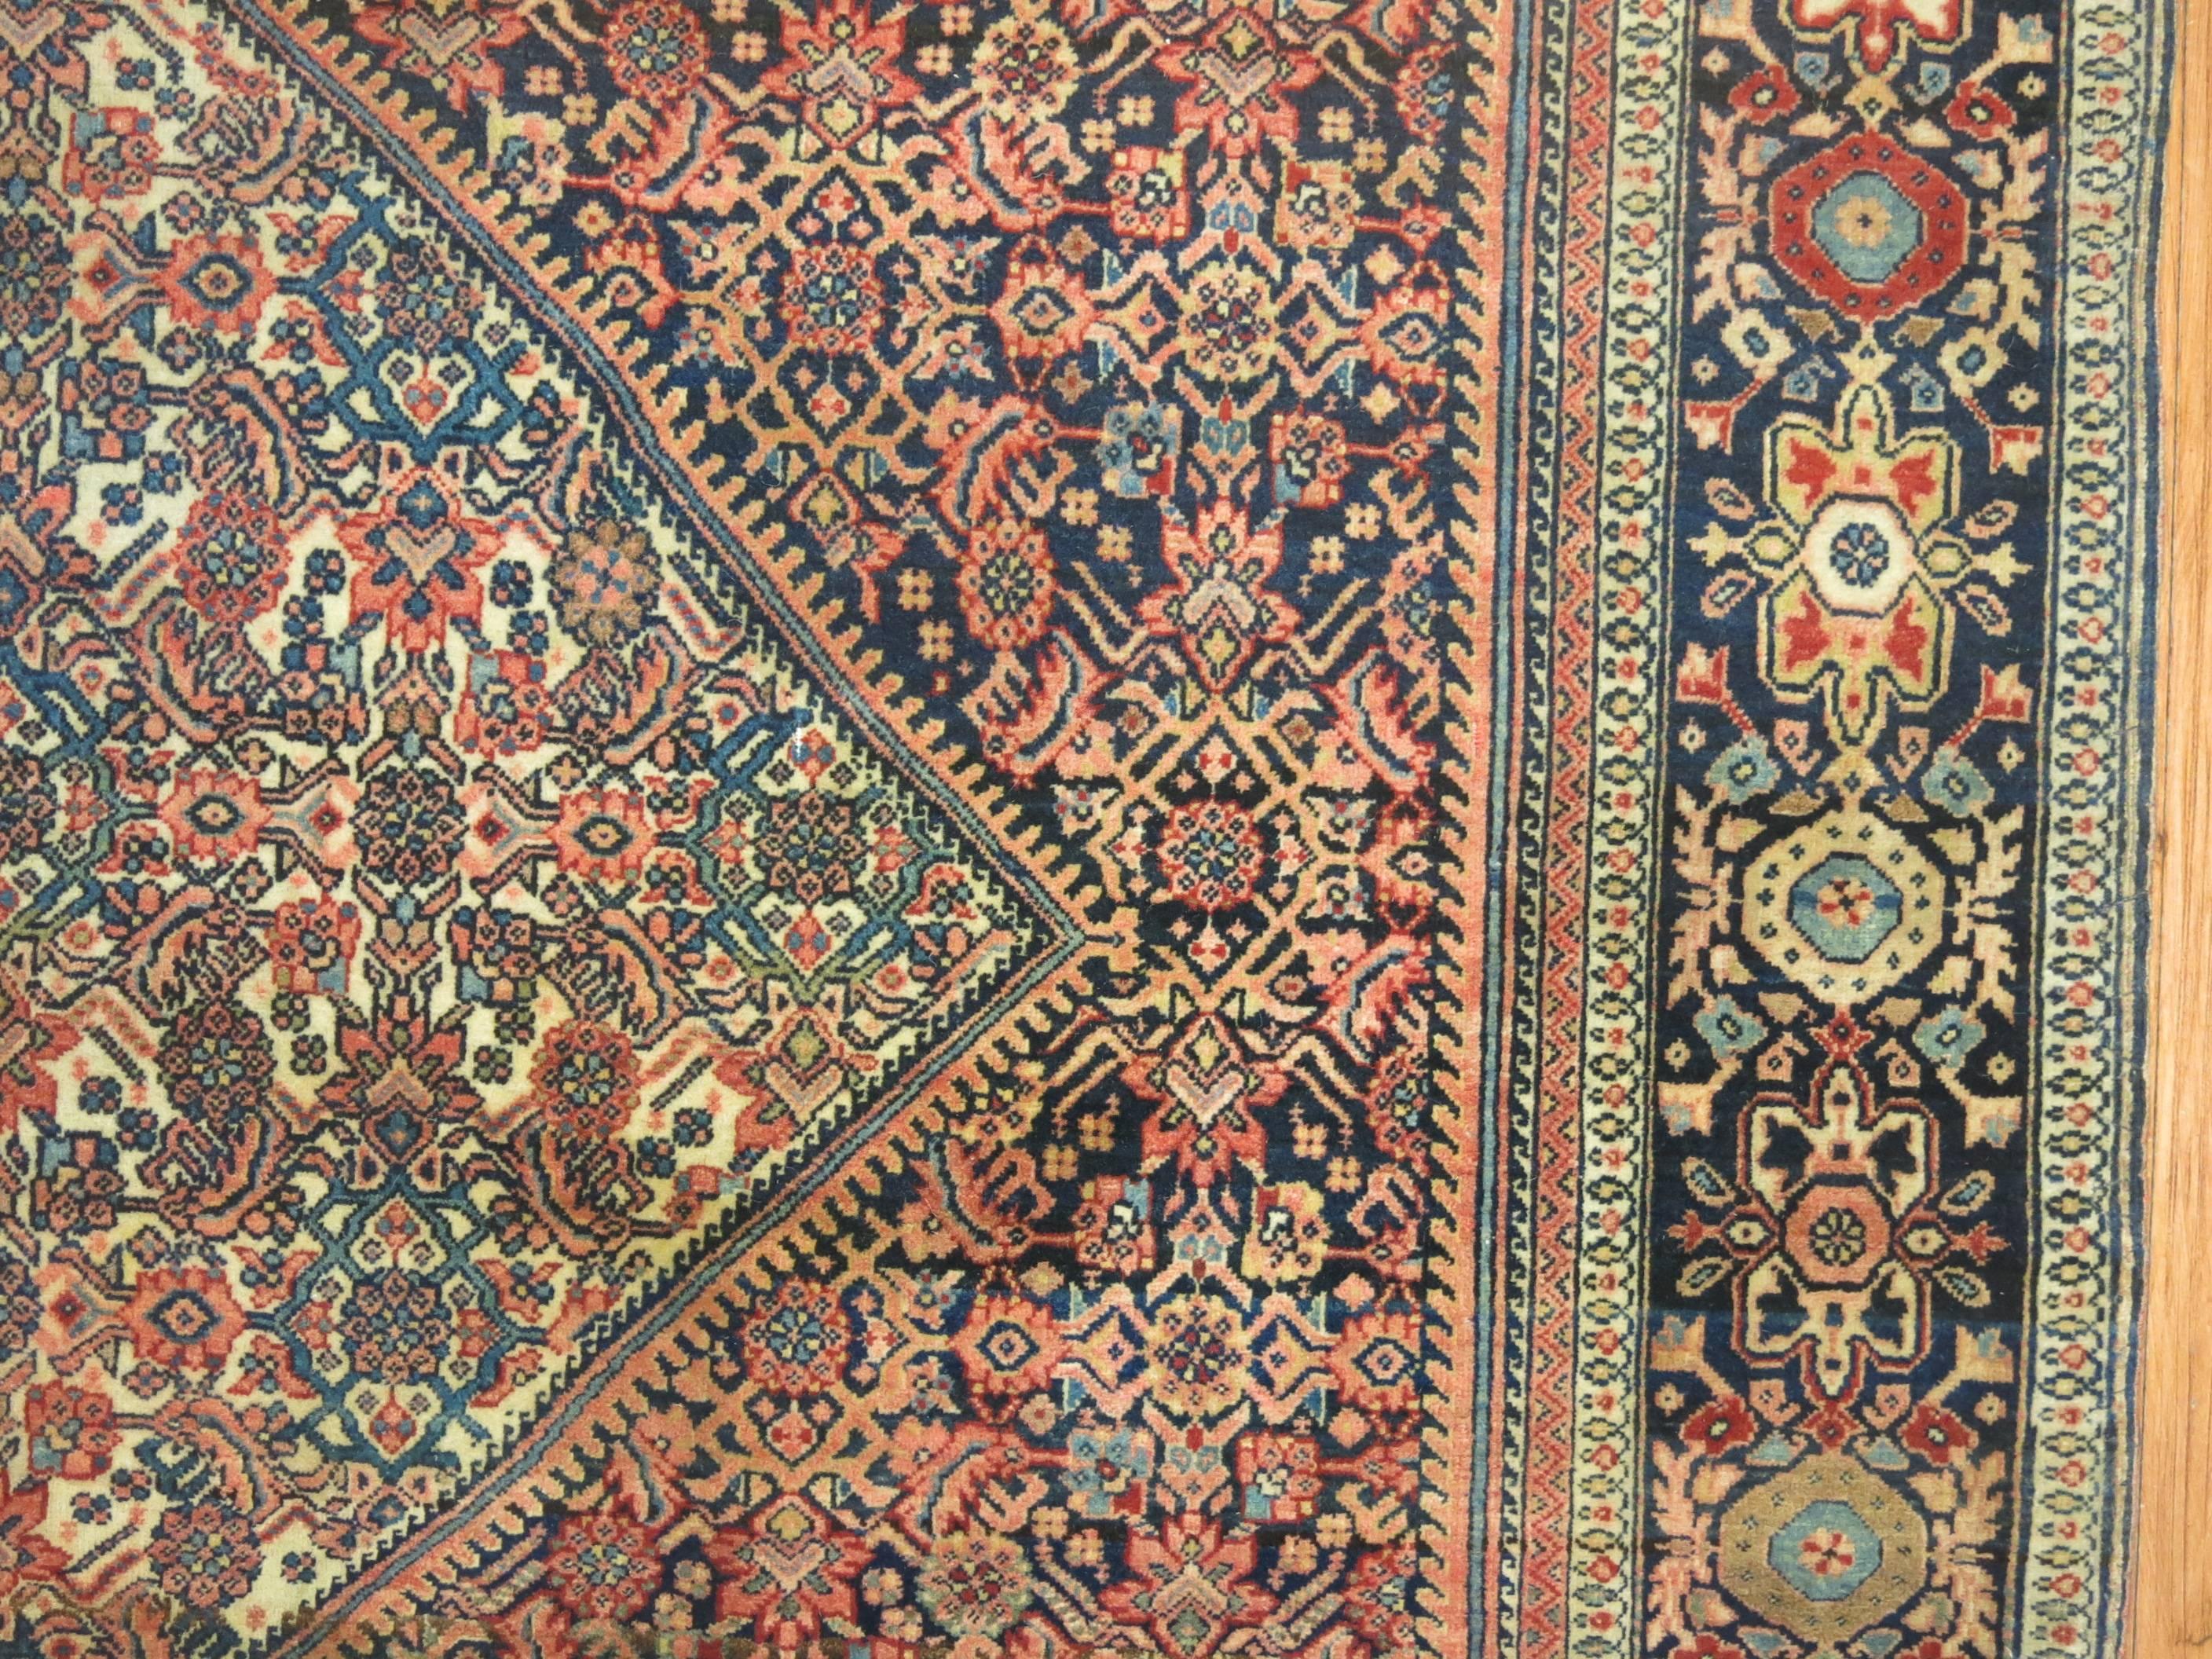 An authentic late 19th century Persian Sarouk Ferahan rug with herati field and medallion. Excellent Pile and condition for its age. Would make for a superb wall piece too if needed.

4'2'' x 6'4''

Sarouk Ferahan antique Persian rugs often match